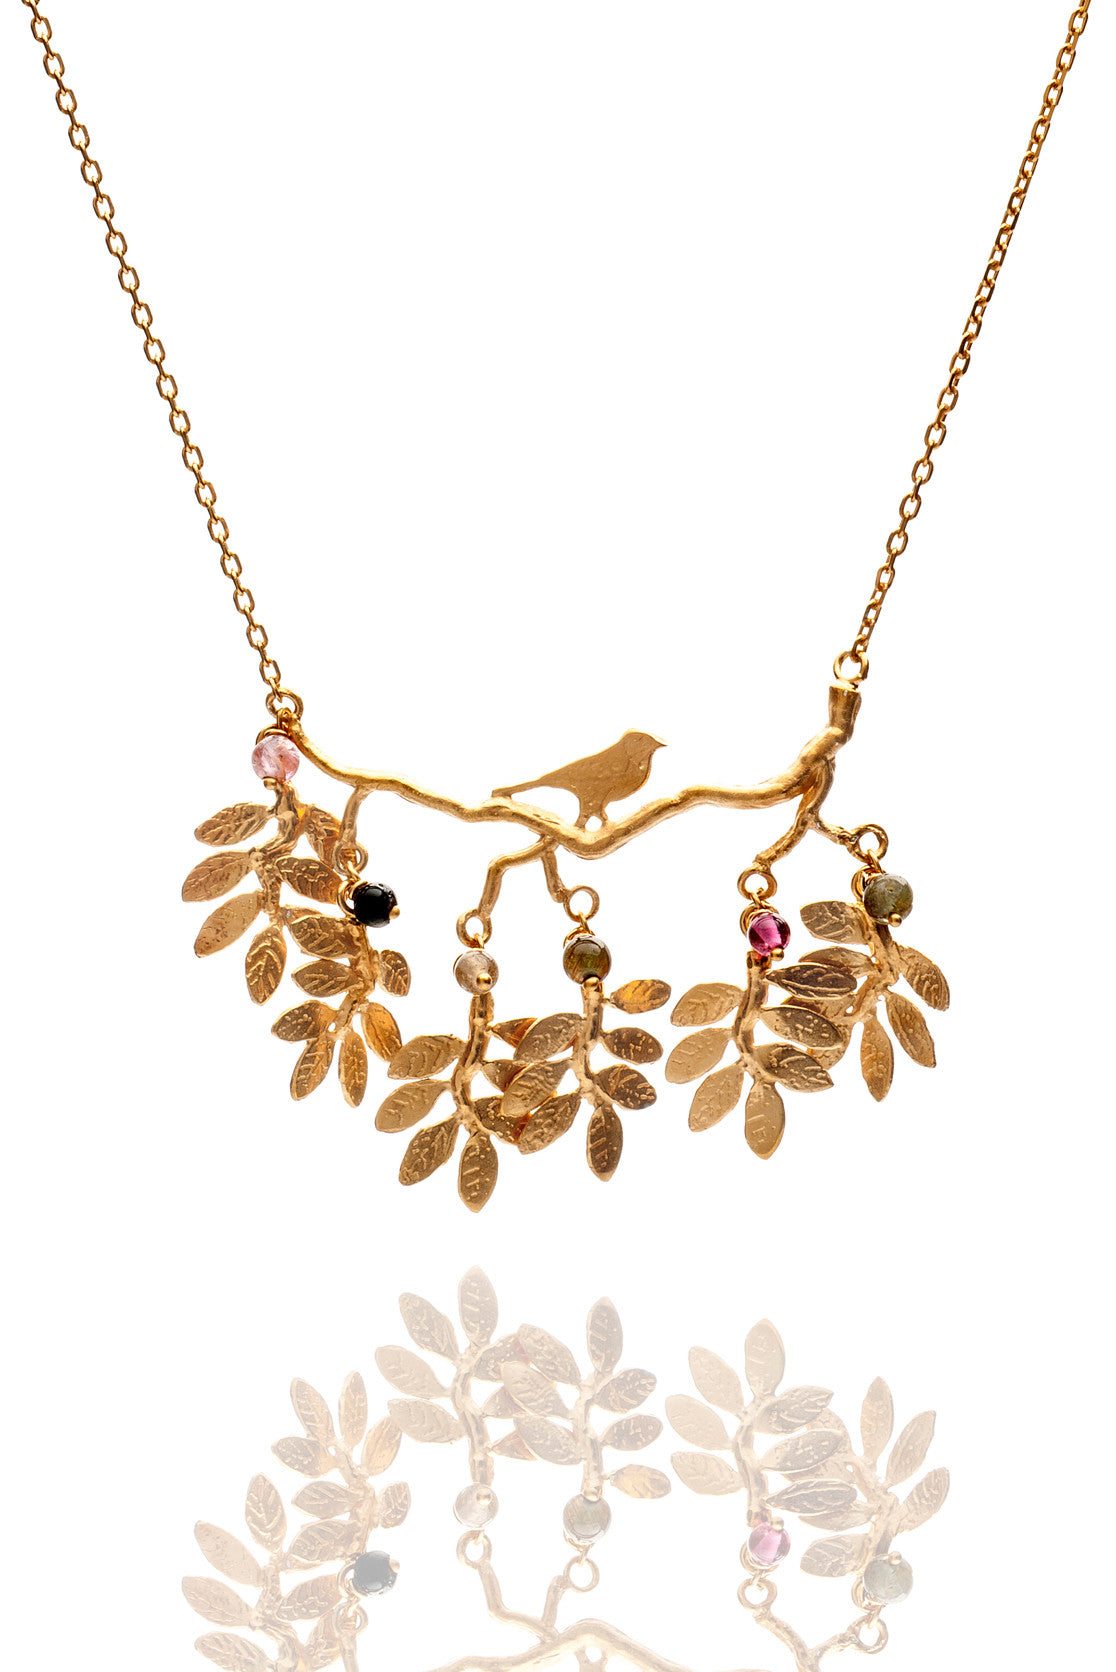 Handmade gold necklace with leaves and bird  pendant